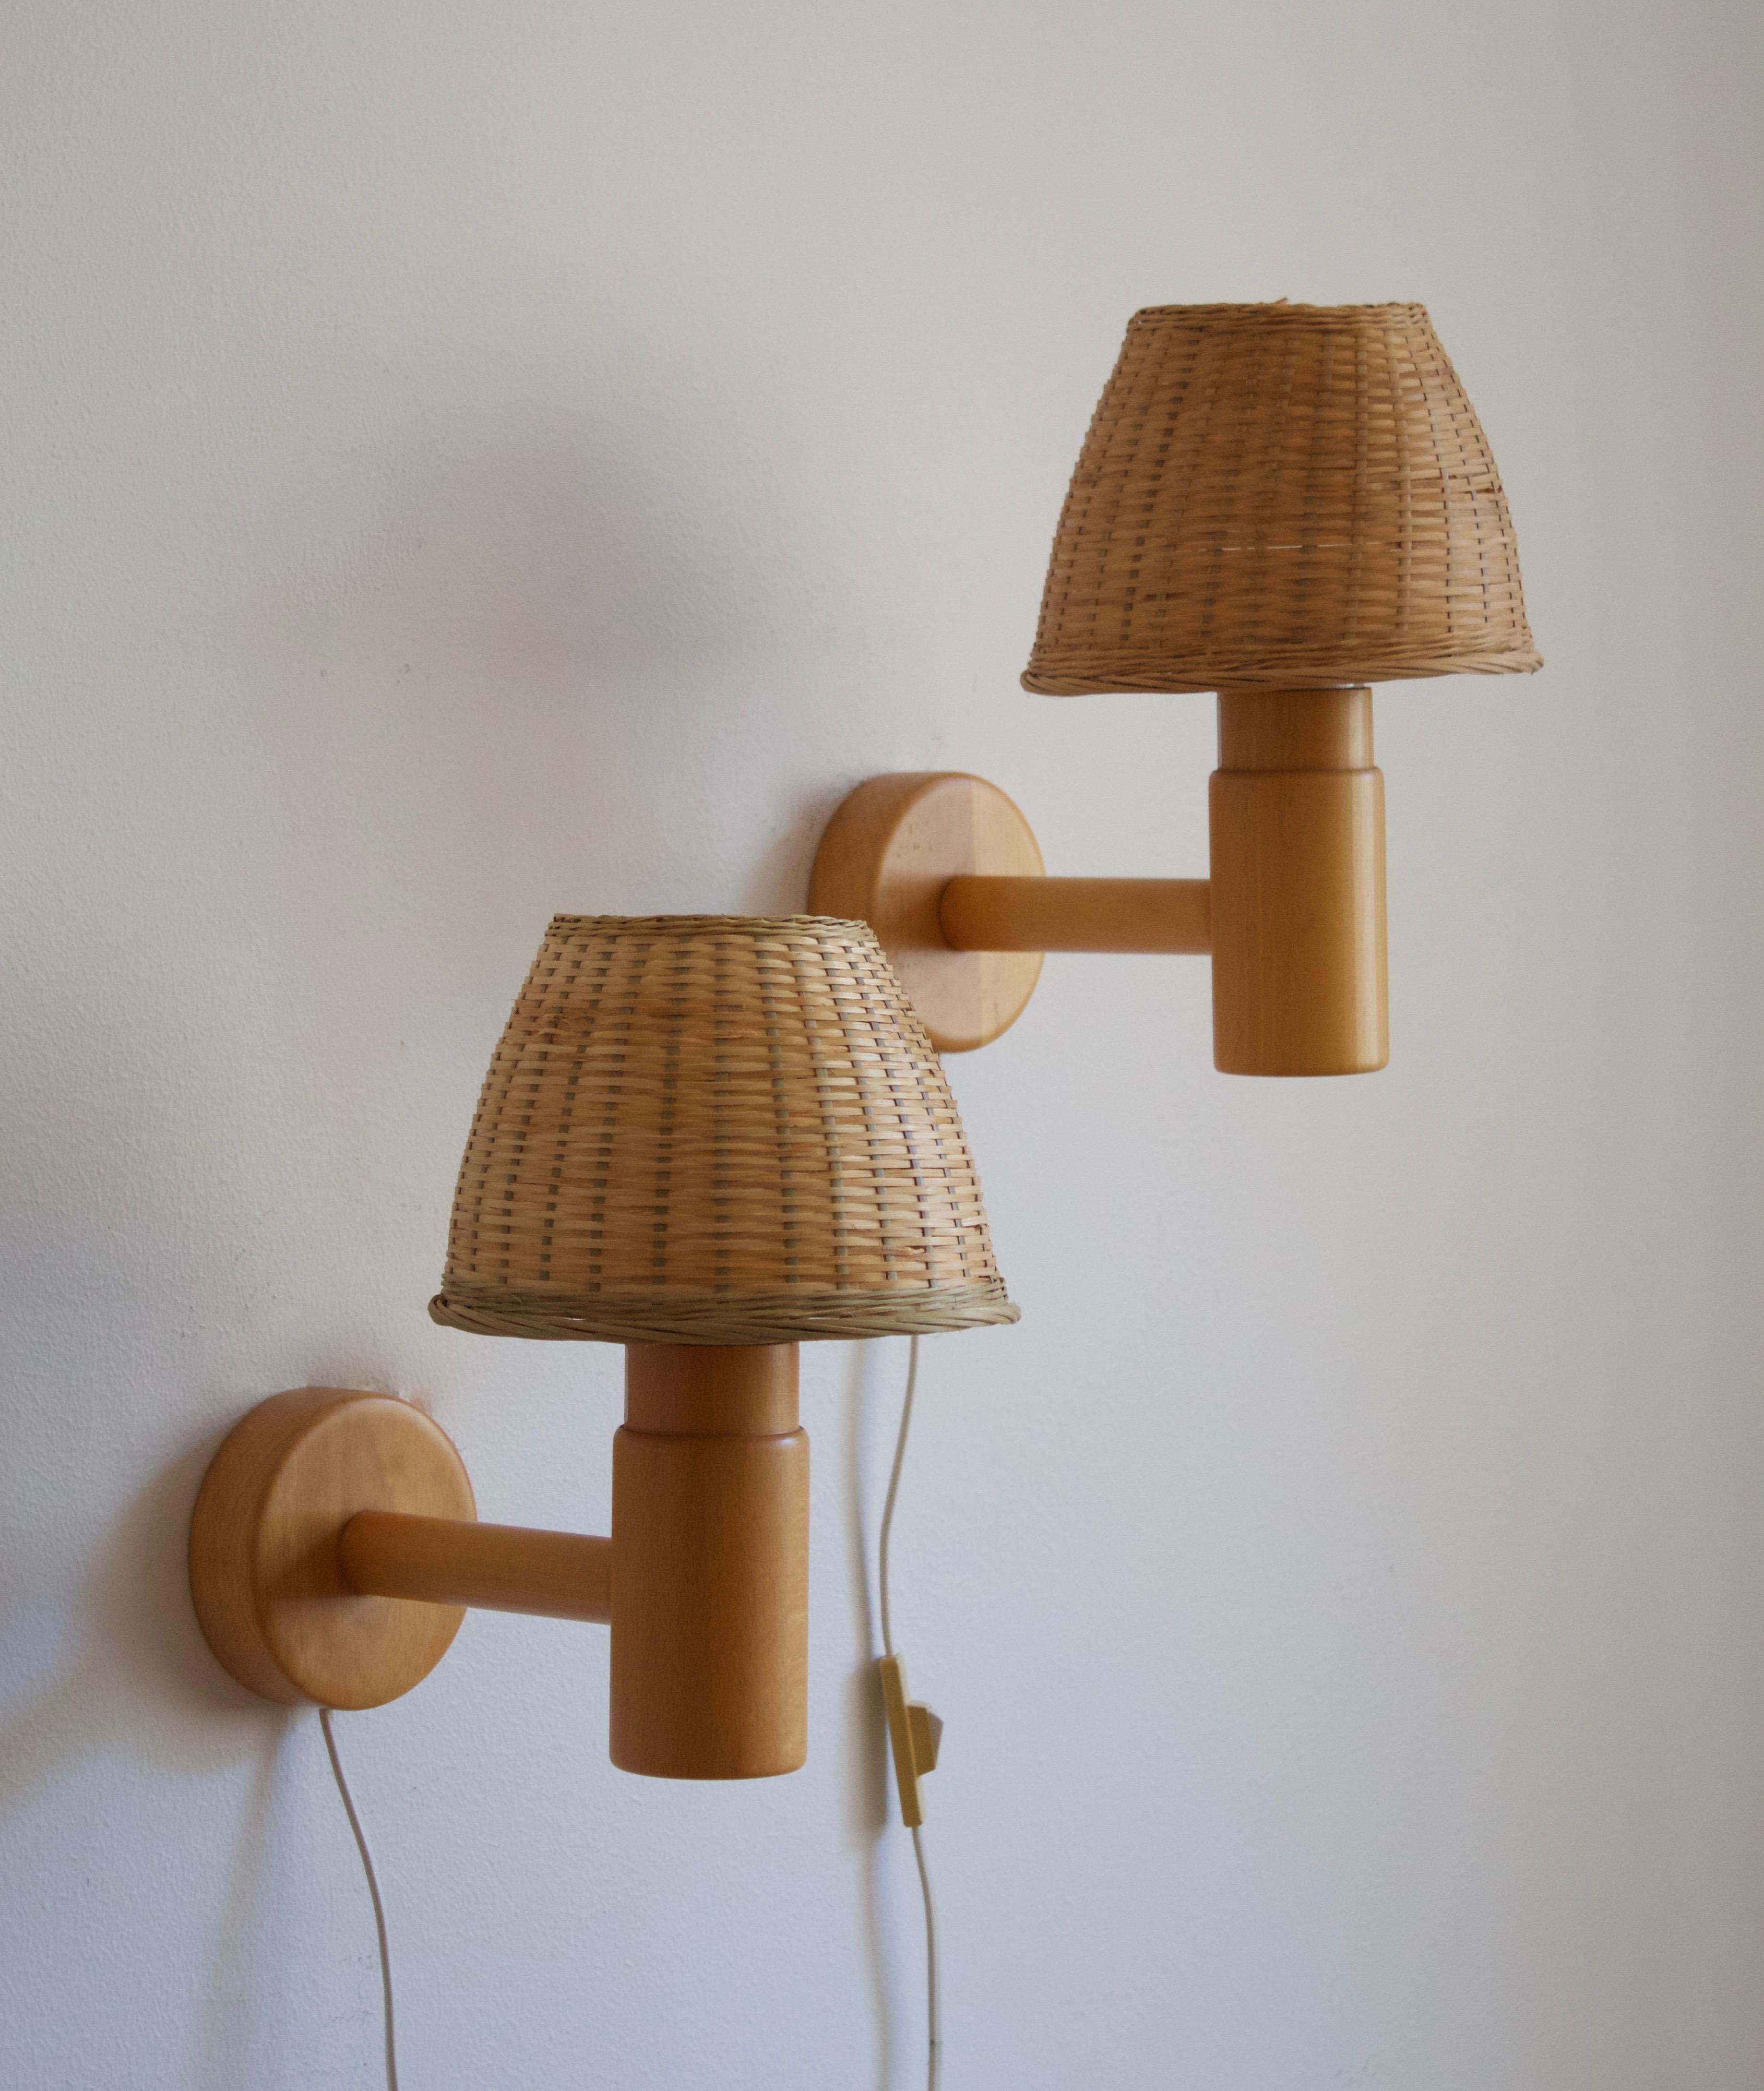 Pair of wall lights / sconces produced by Swedish Ateljé Lyktan. Assorted vintage rattan lampshades. Circa 1970s. Labeled.

Other Nordic lighting designers include Paavo Tynell, Hans-Agne Jacobson, Carl-Axel Acking, and Alvar Aalto.